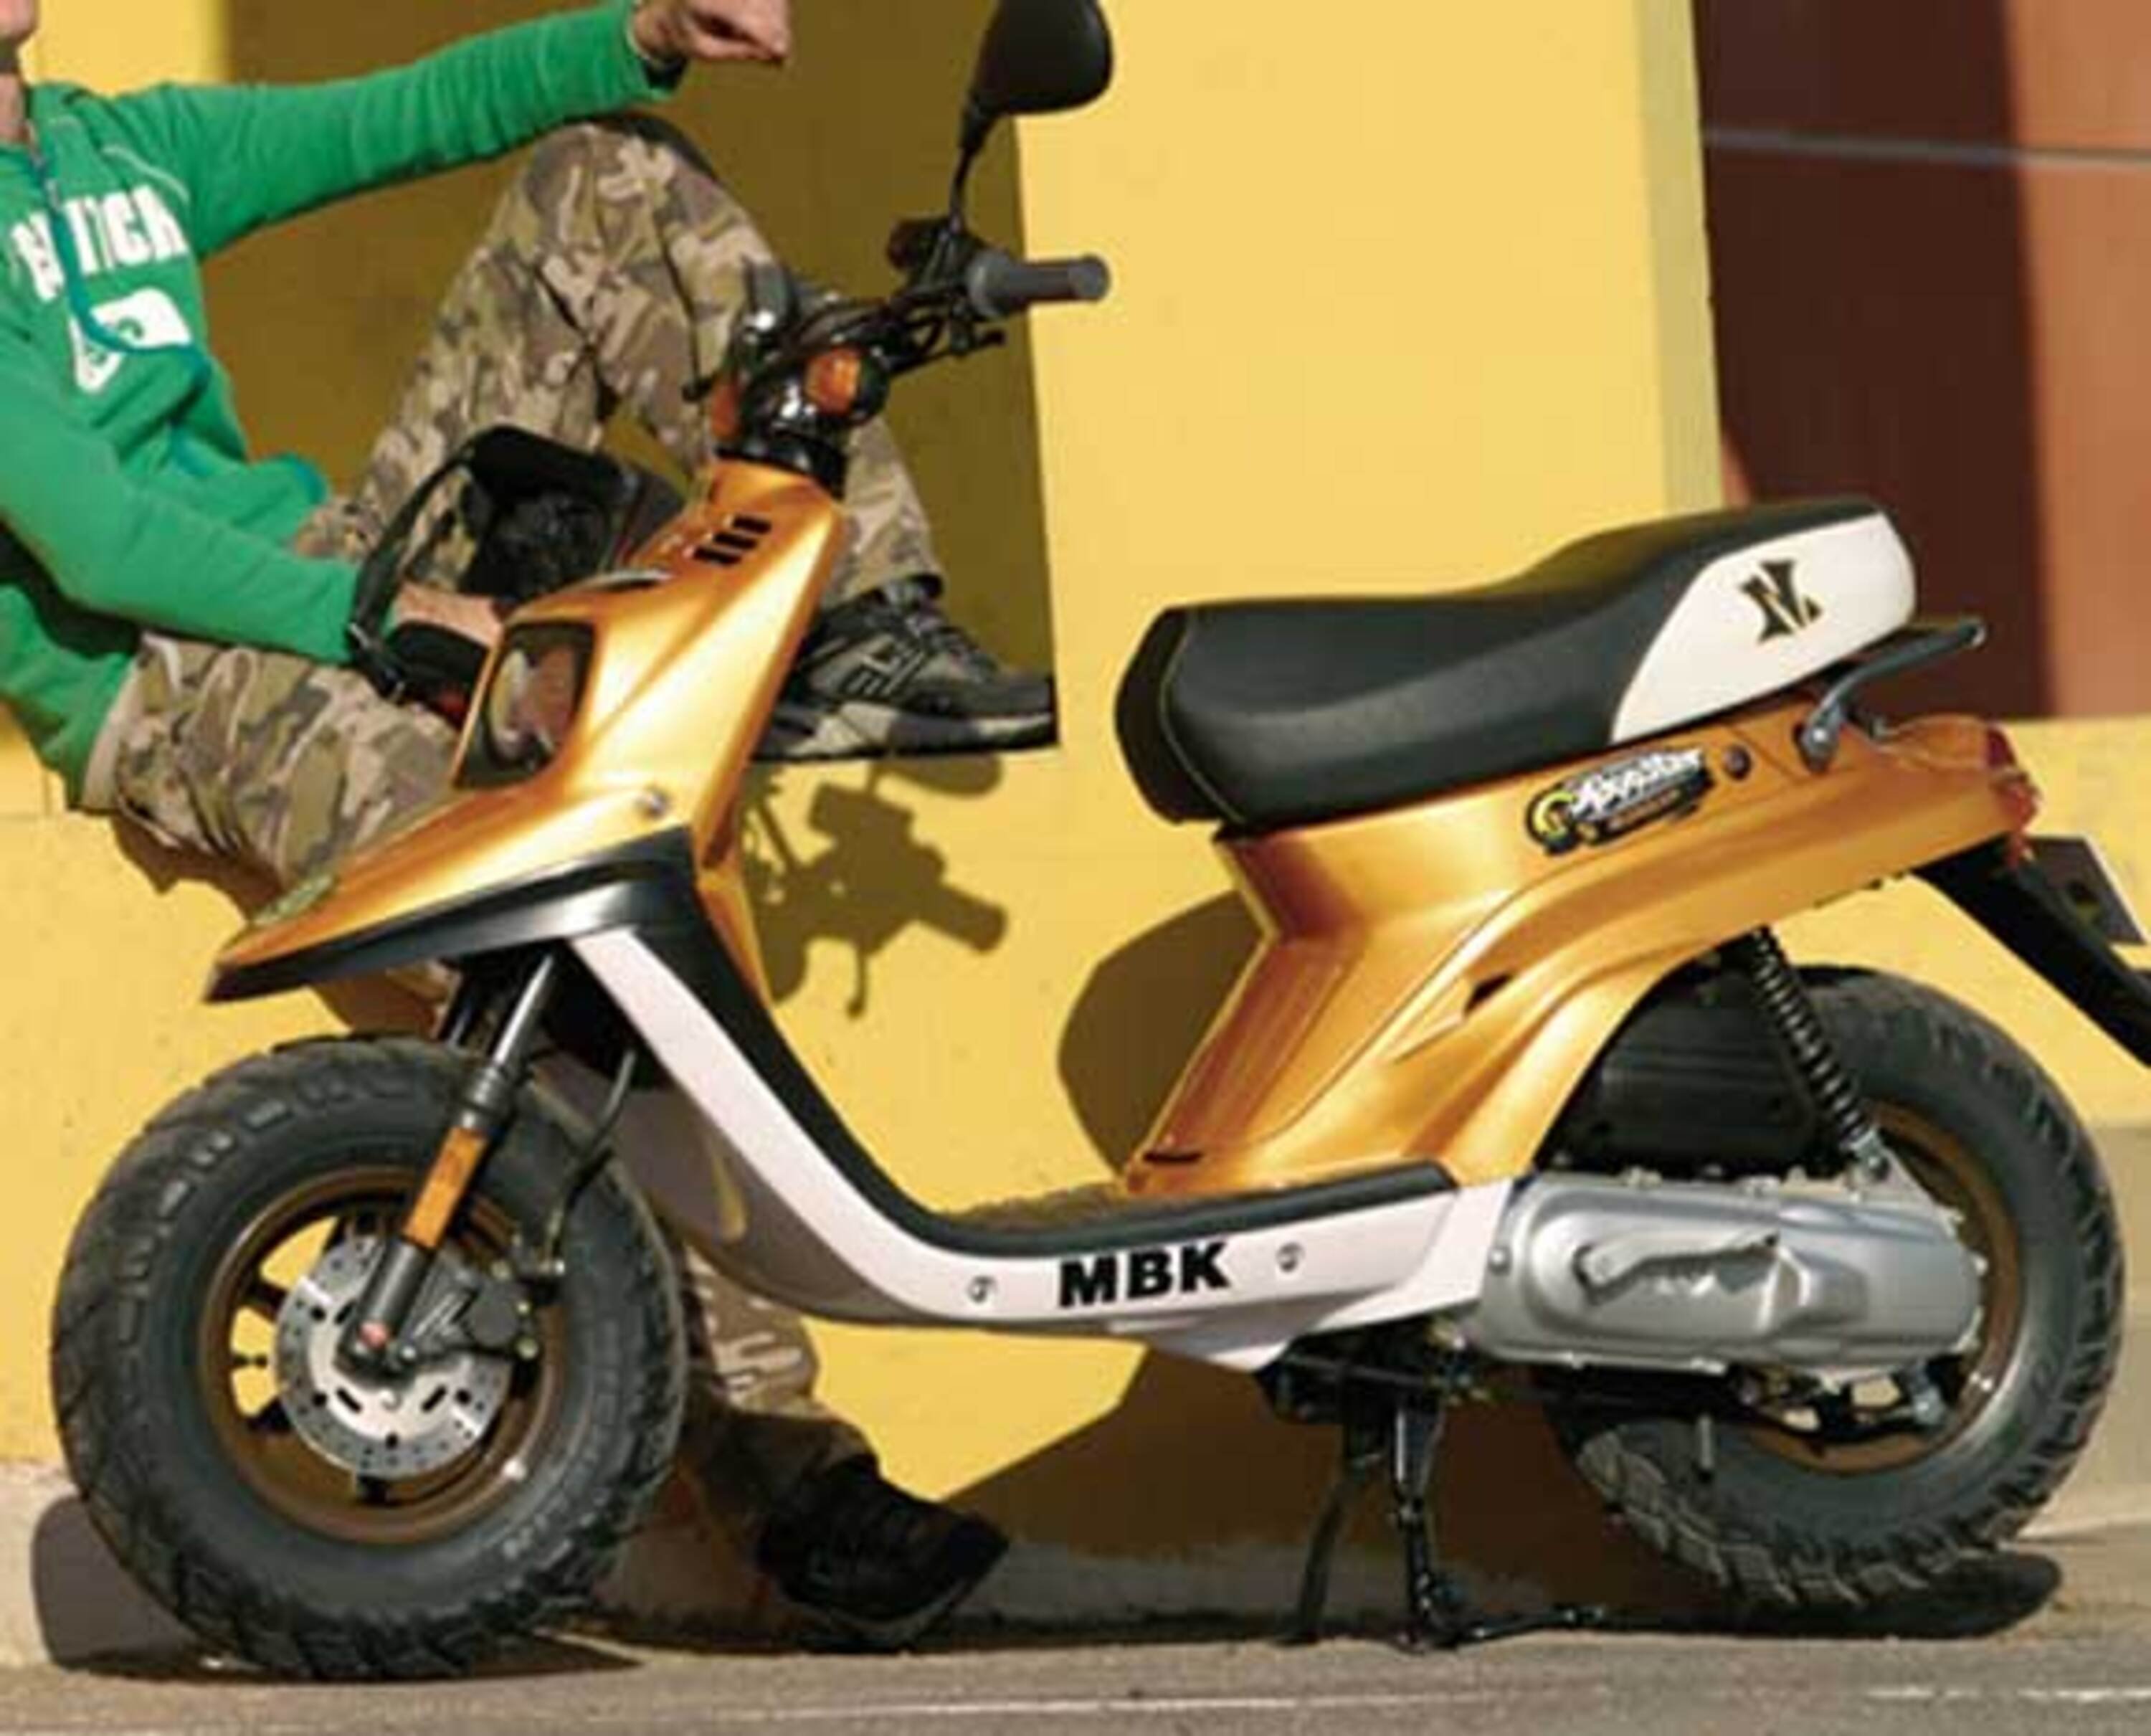 2009 MBK Booster 12-inch Naked specifications and pictures